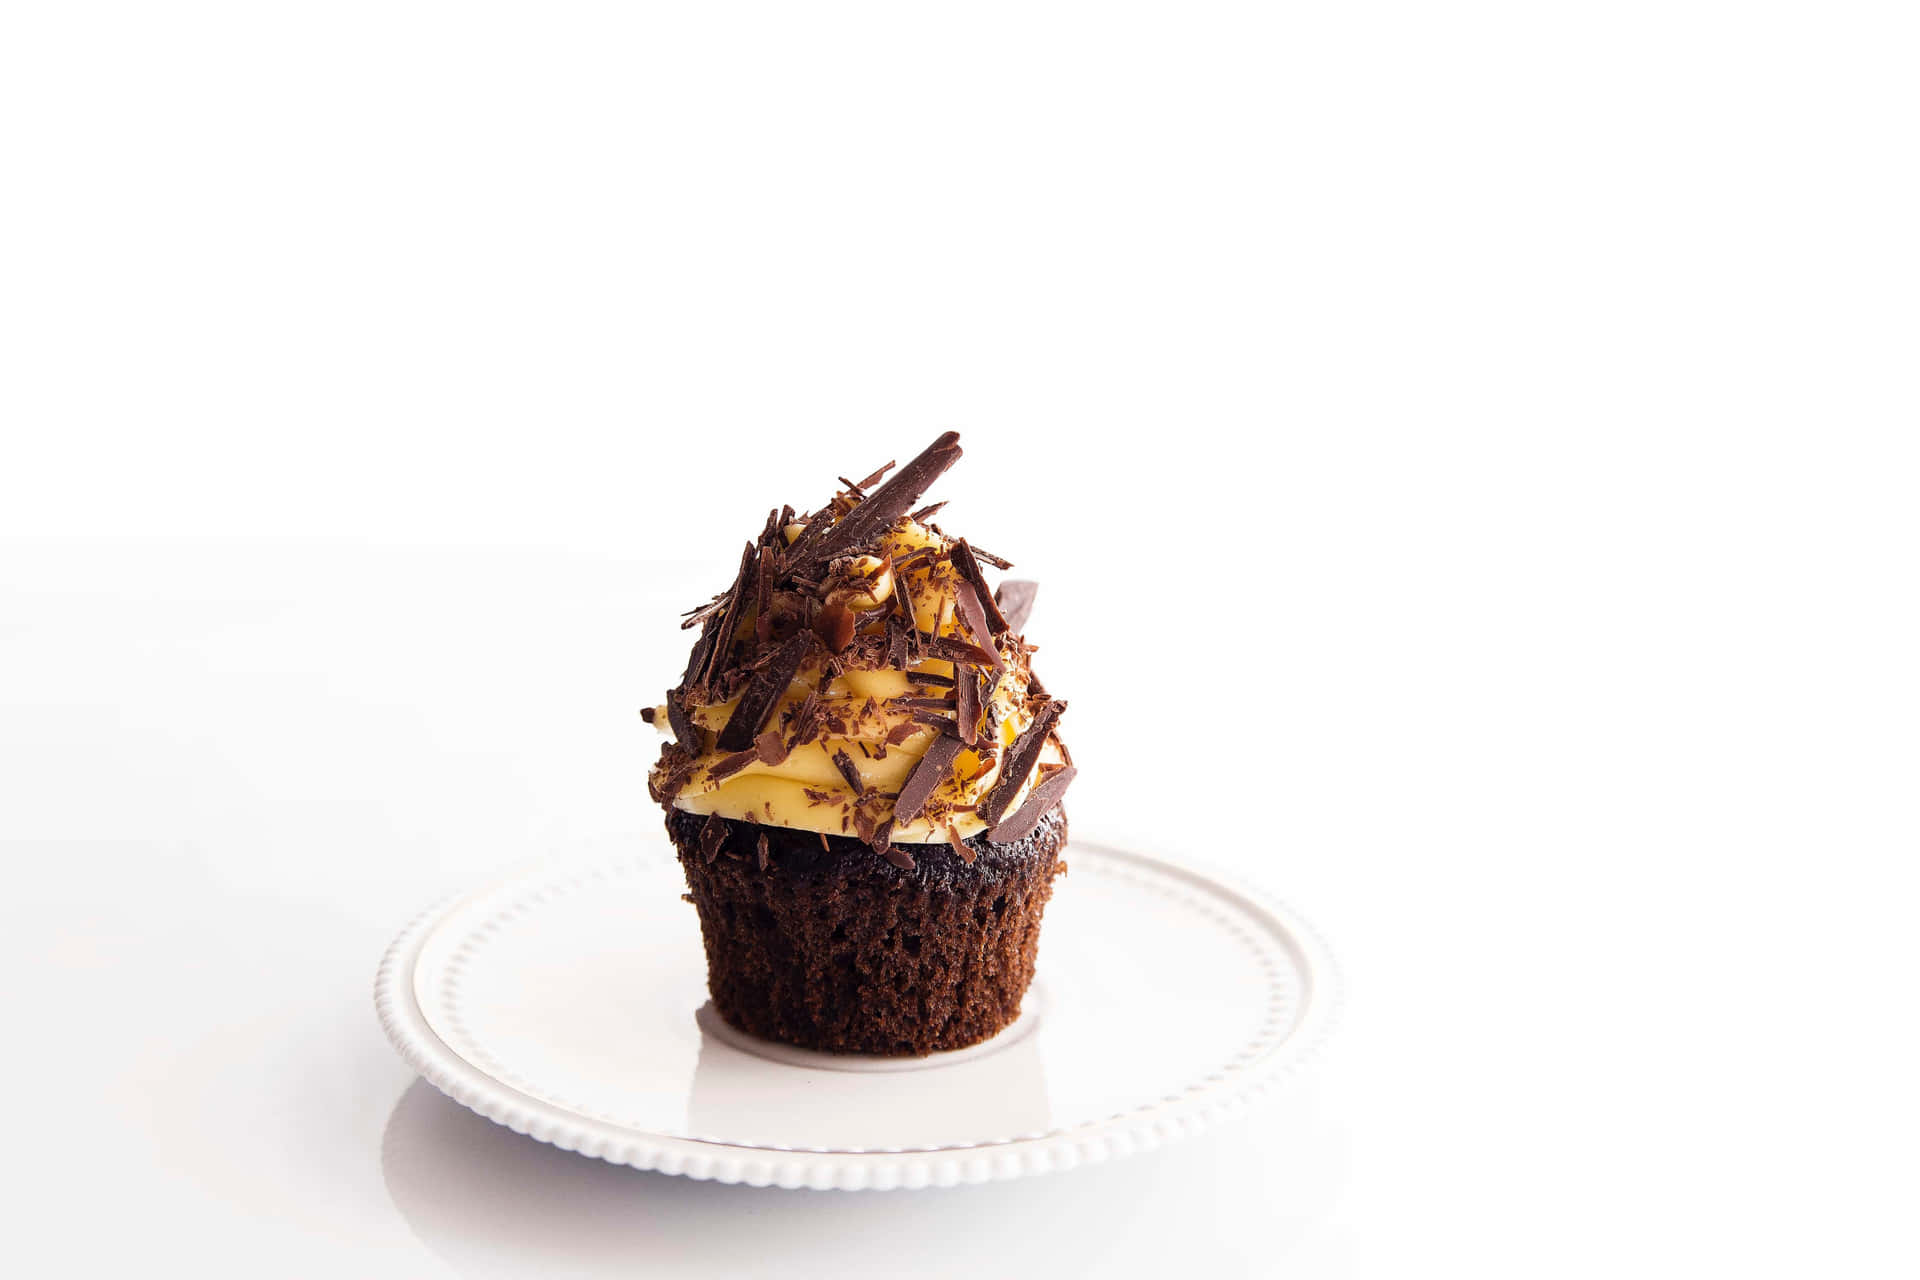 A delicious, sweet cupcake with an ice cream topping, perfect for any occasion